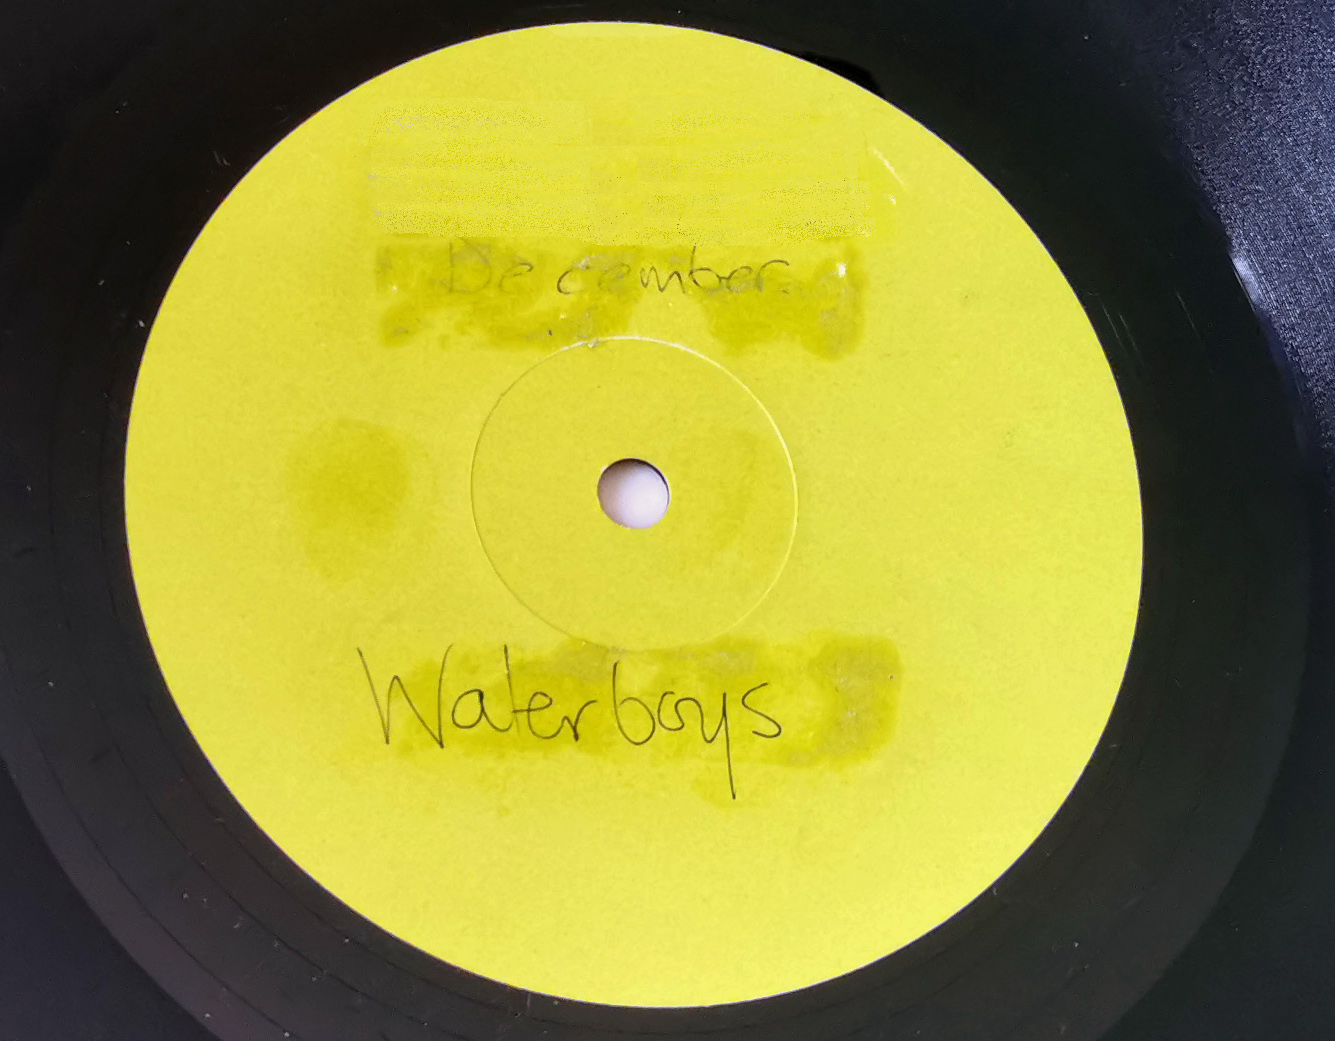 wbs_december_12_one_sided_test_pressing